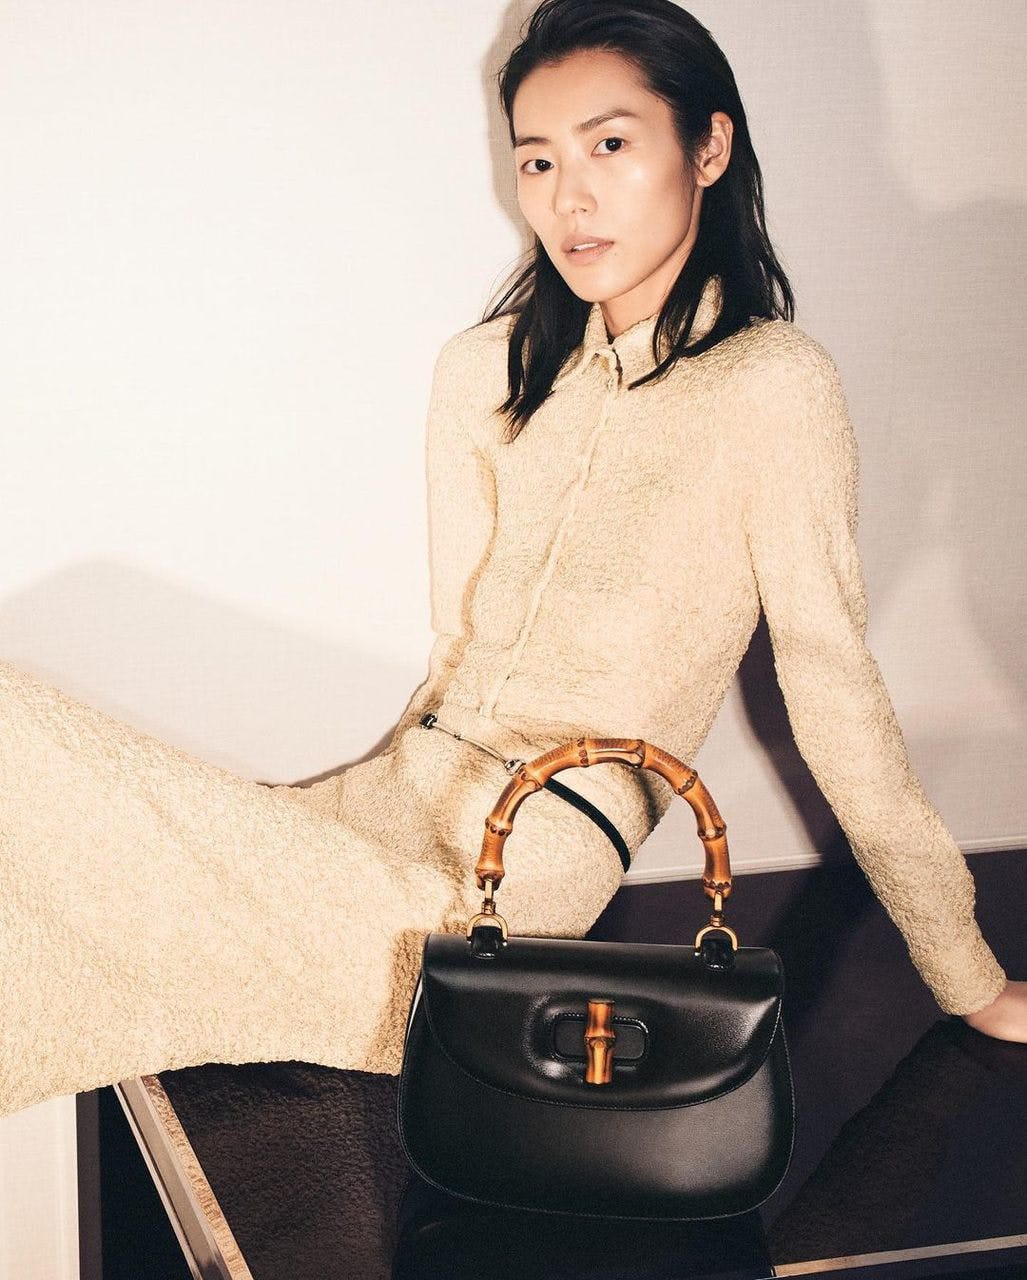 Promotion of the new 1947 Bamboo Bag campaign, starring Liu Wen (Reproduction/Gucci/Instagram)